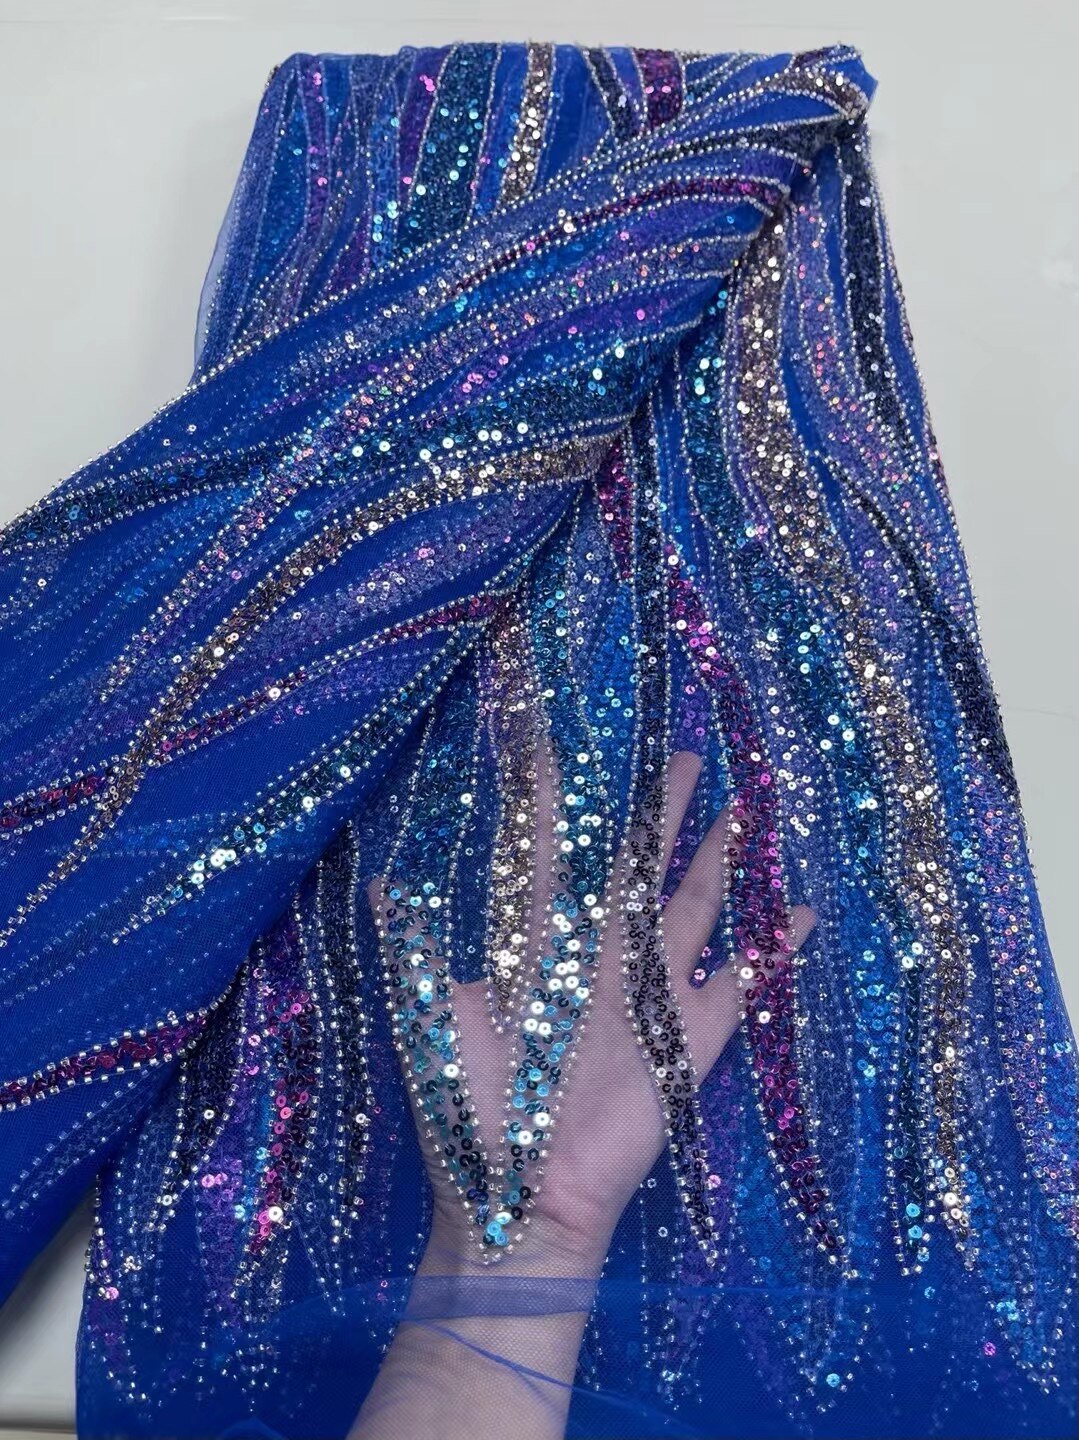 5 YARDS / 8 COLORS / Clarette Sequin Beaded Embroidered  Mesh Sparkly Lace Bridal  Party Prom Bridal Dress Fabric